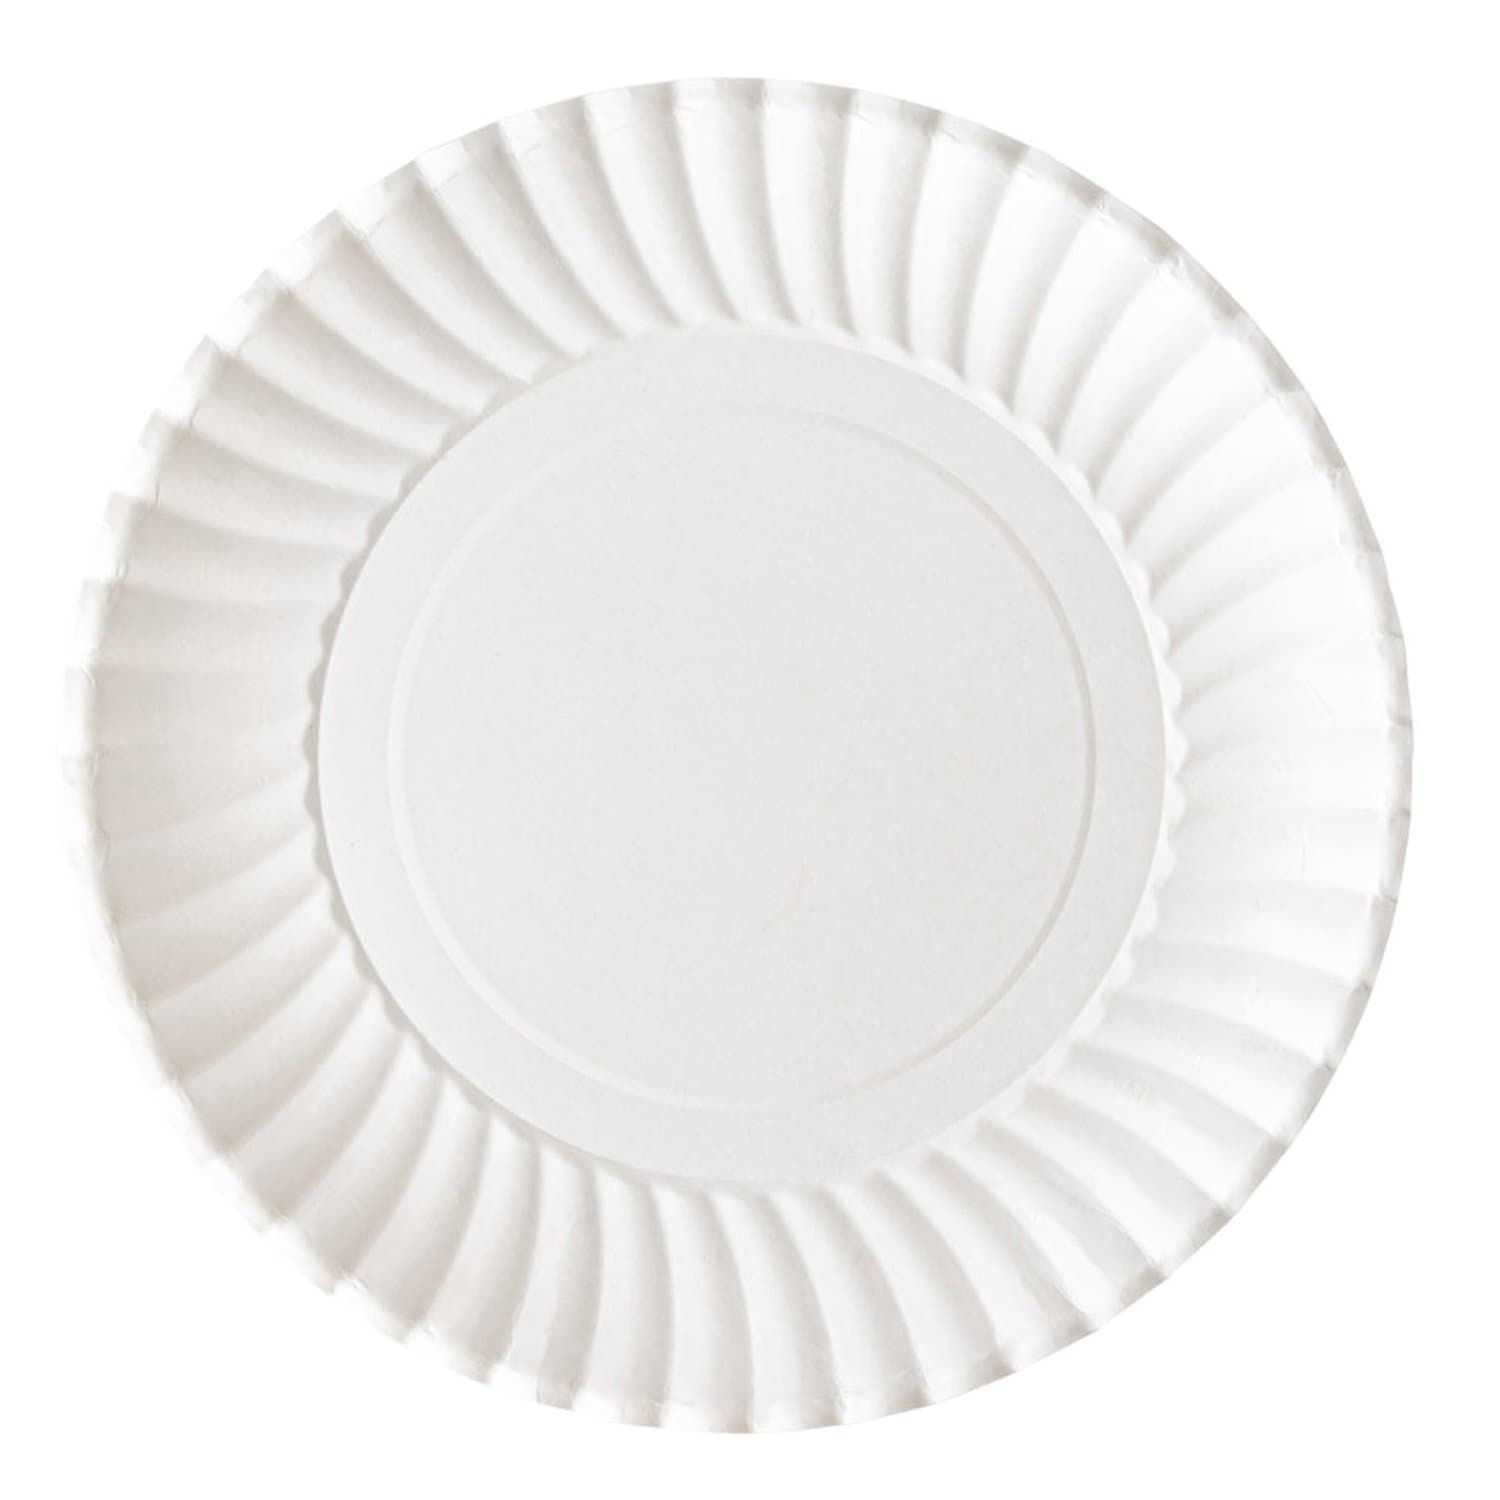 Case of Paper - 9" - Disposable - Uncoated - White - Lunch Plates | 1200 ct. Plates Blue Sky   